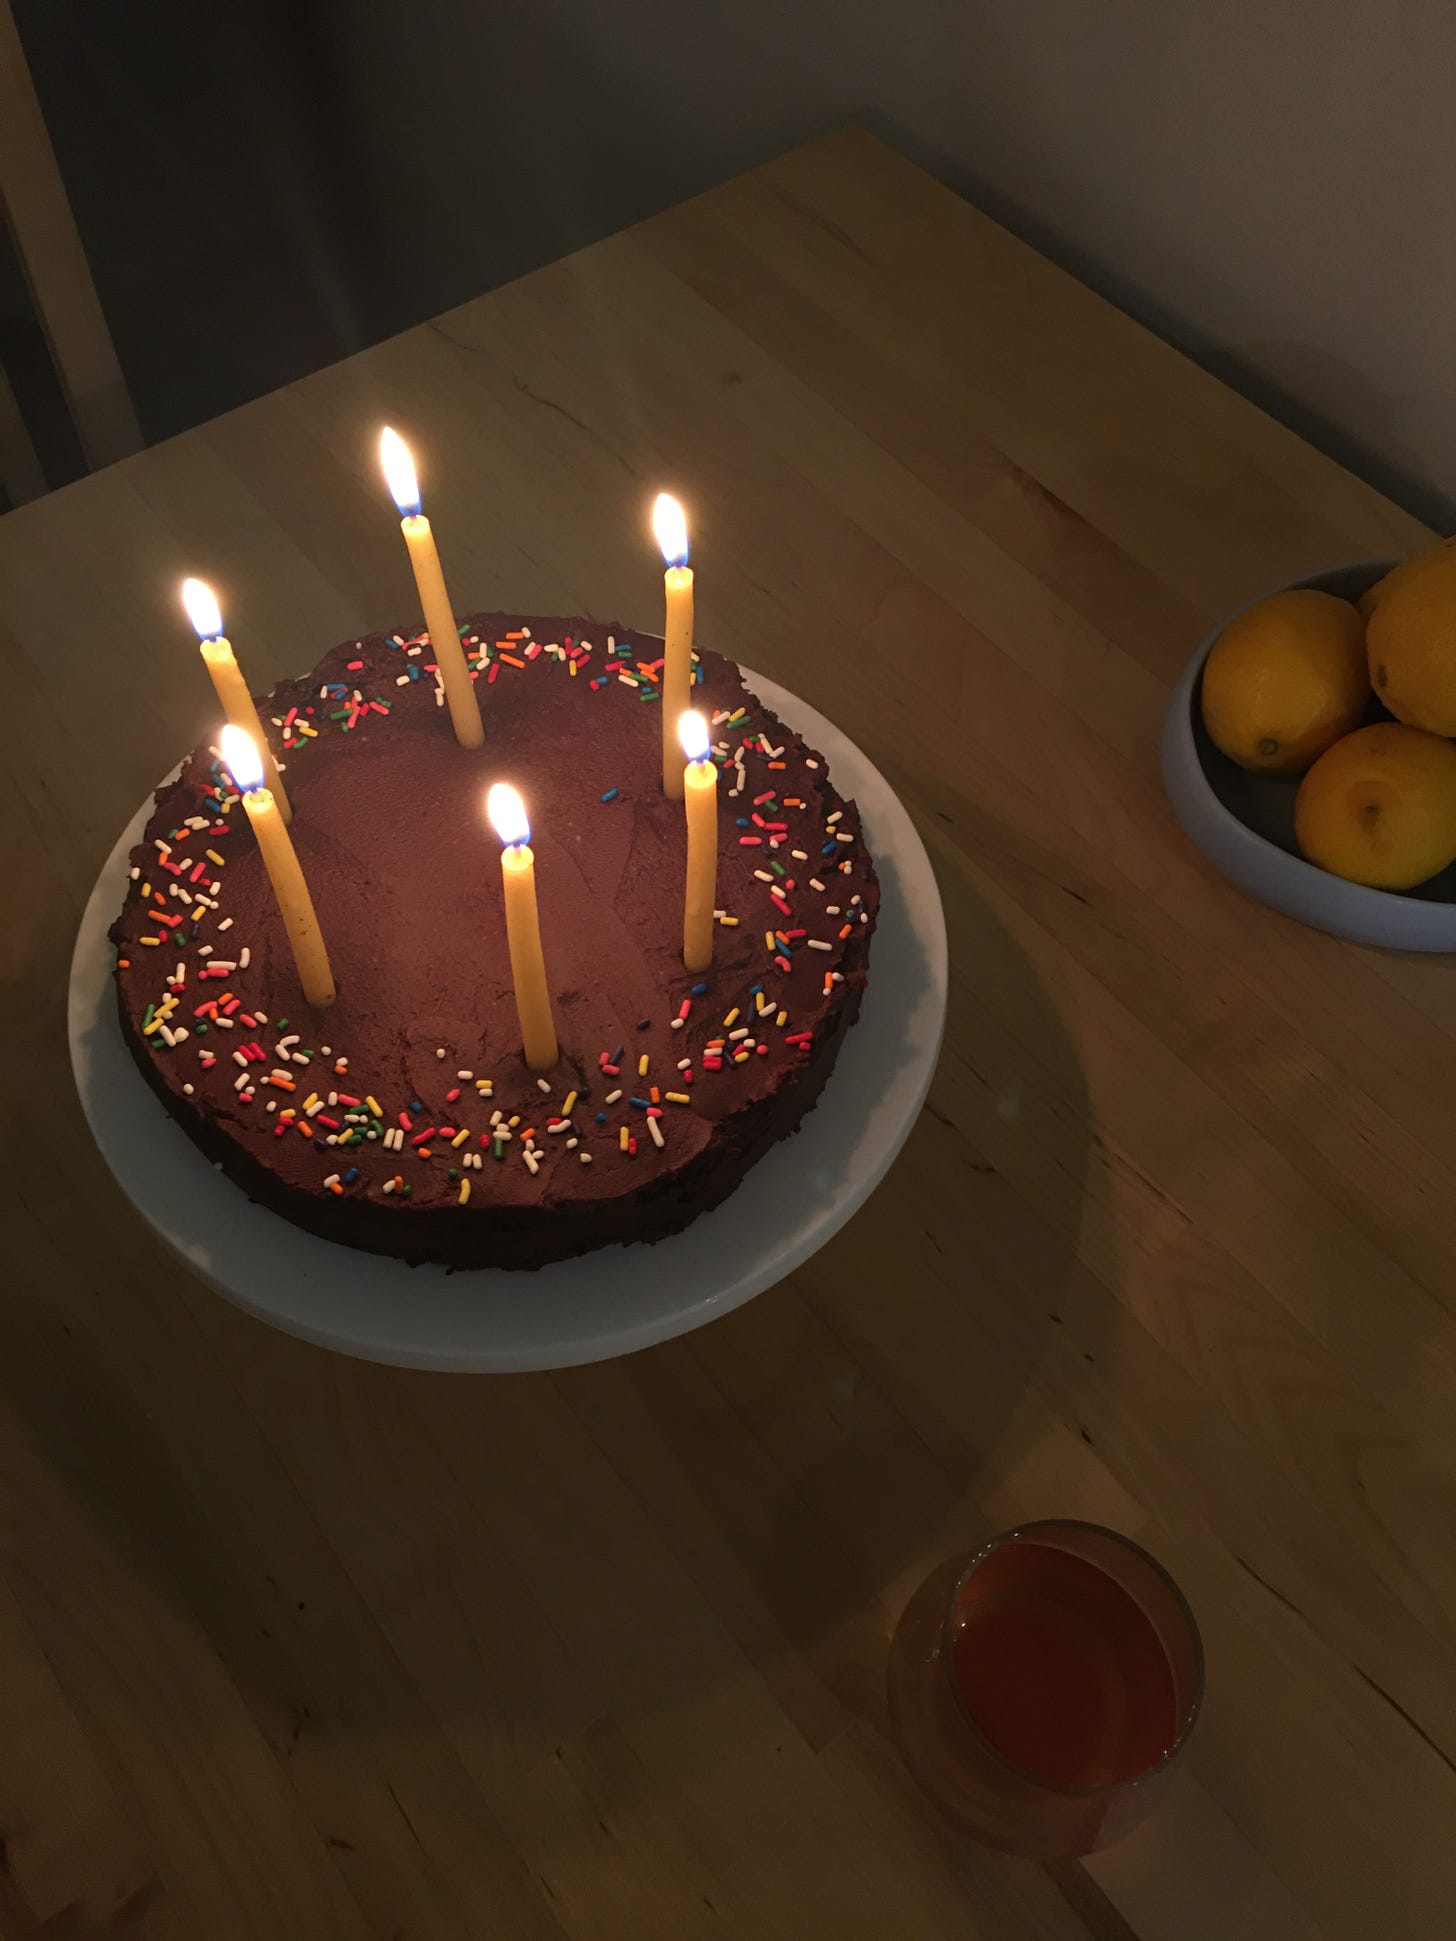 Chocolate birthday cake with sprinkles and candles